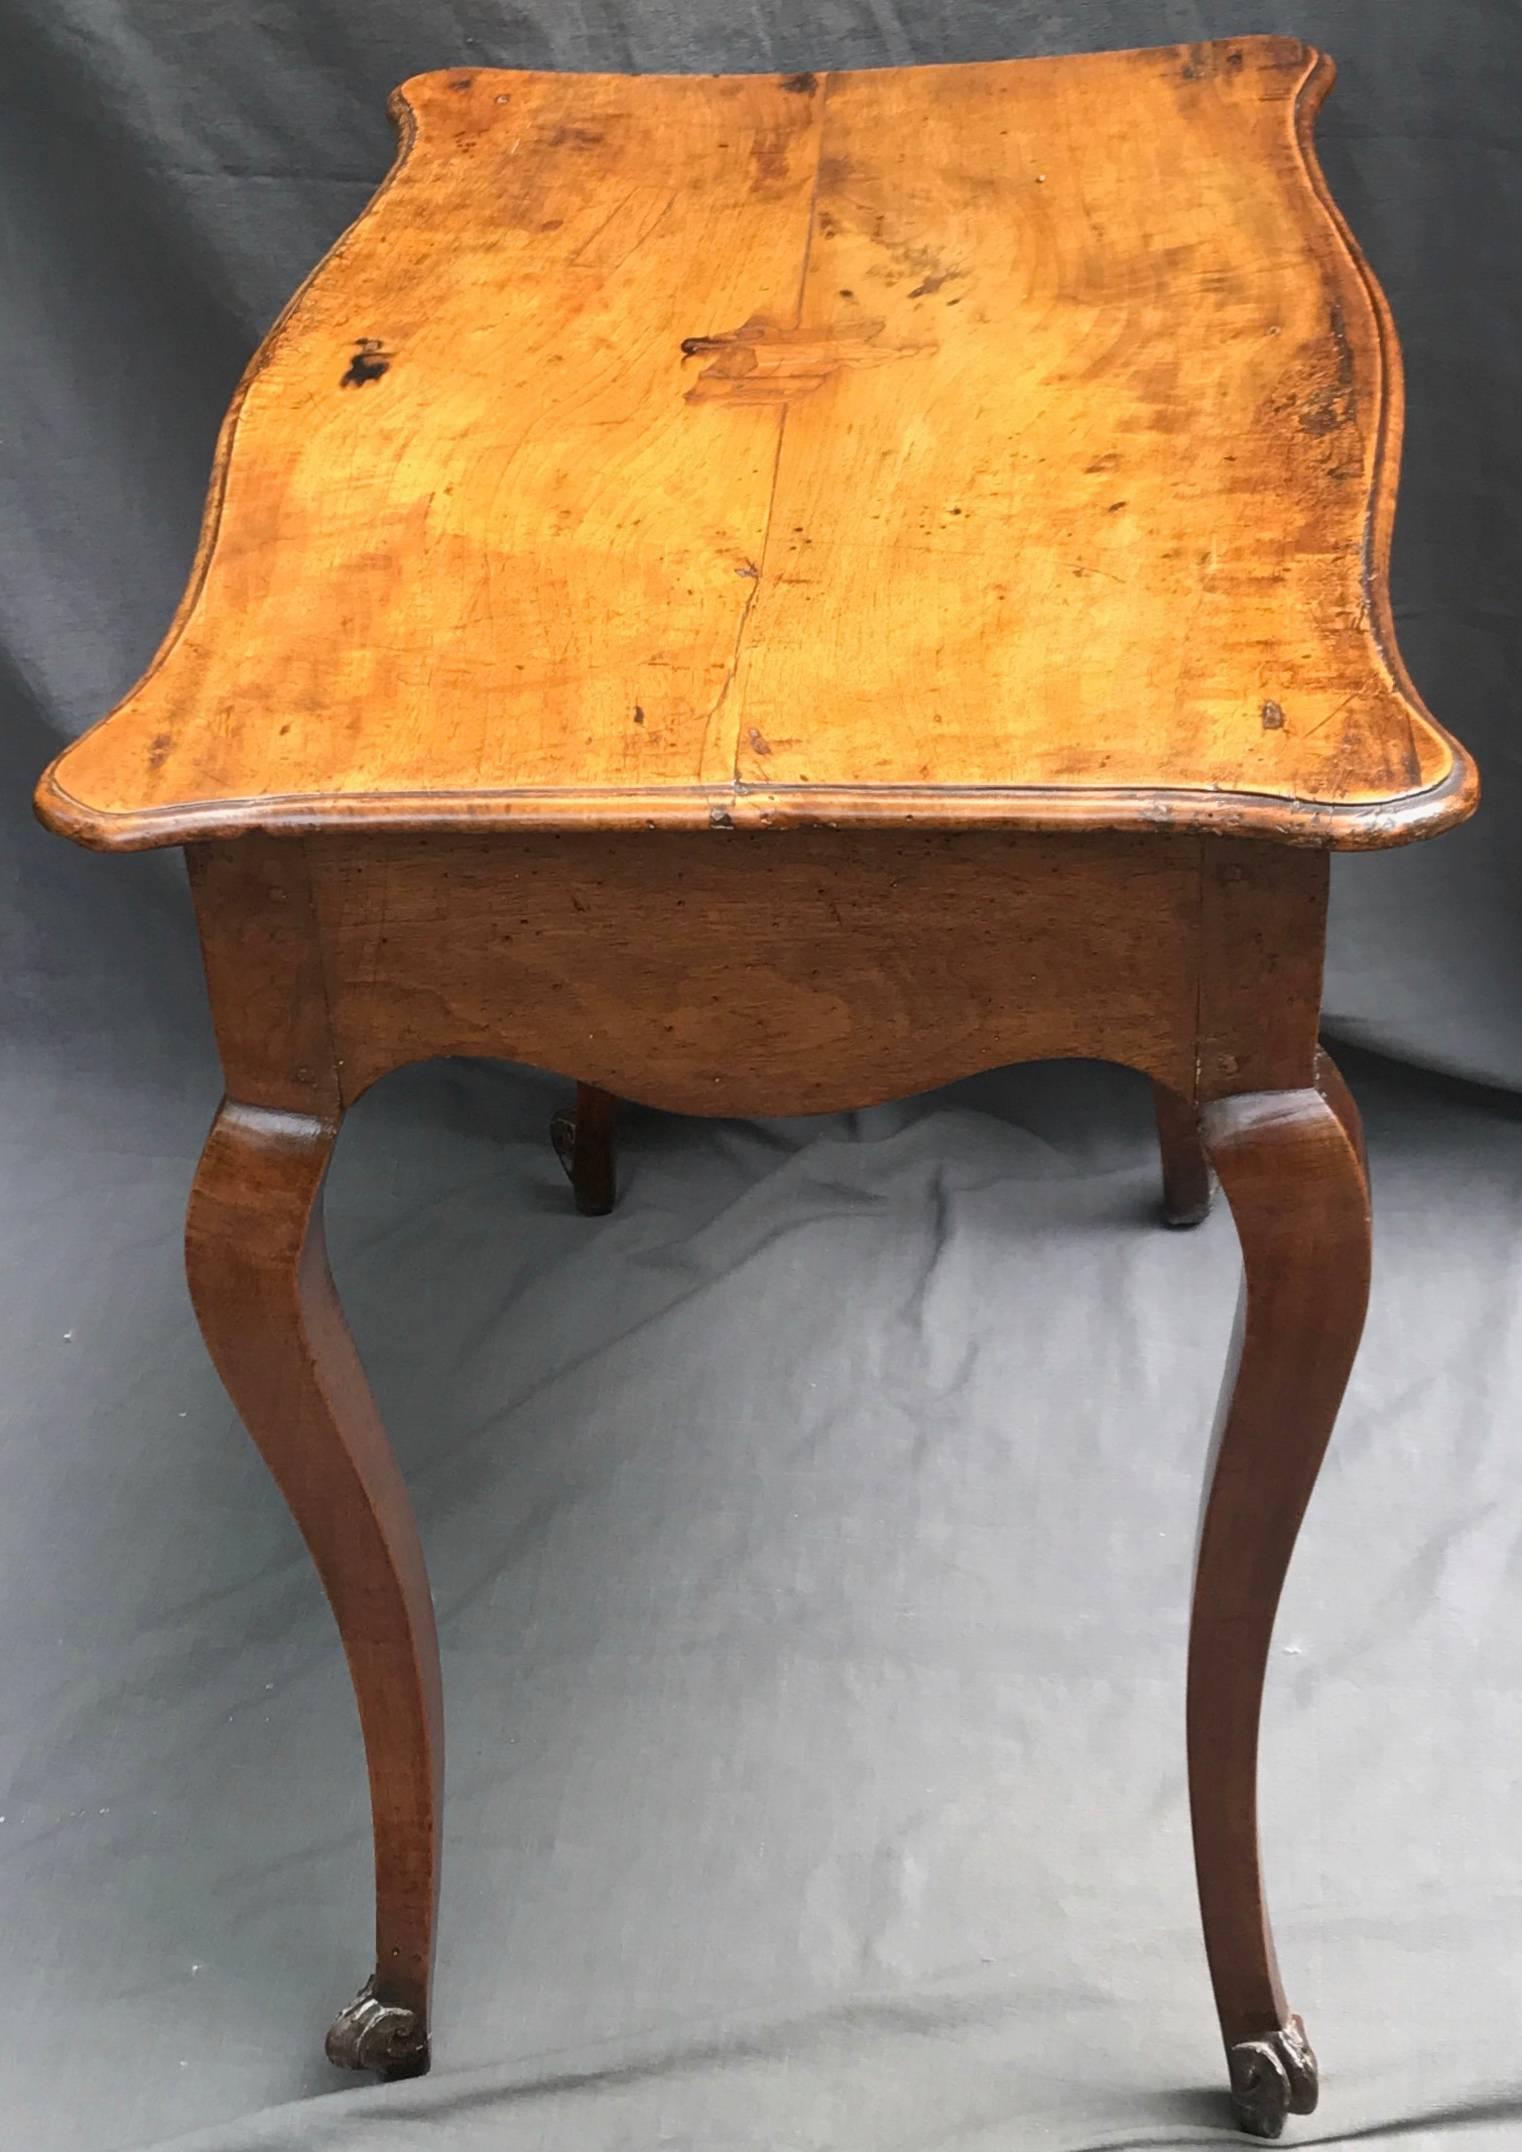 Louis XV walnut side table with a cartouche-form top above cabriole legs terminating in scroll feet; top featuring inlaid cavalier, Italy, second half of the 18th century.
Dimensions: 30